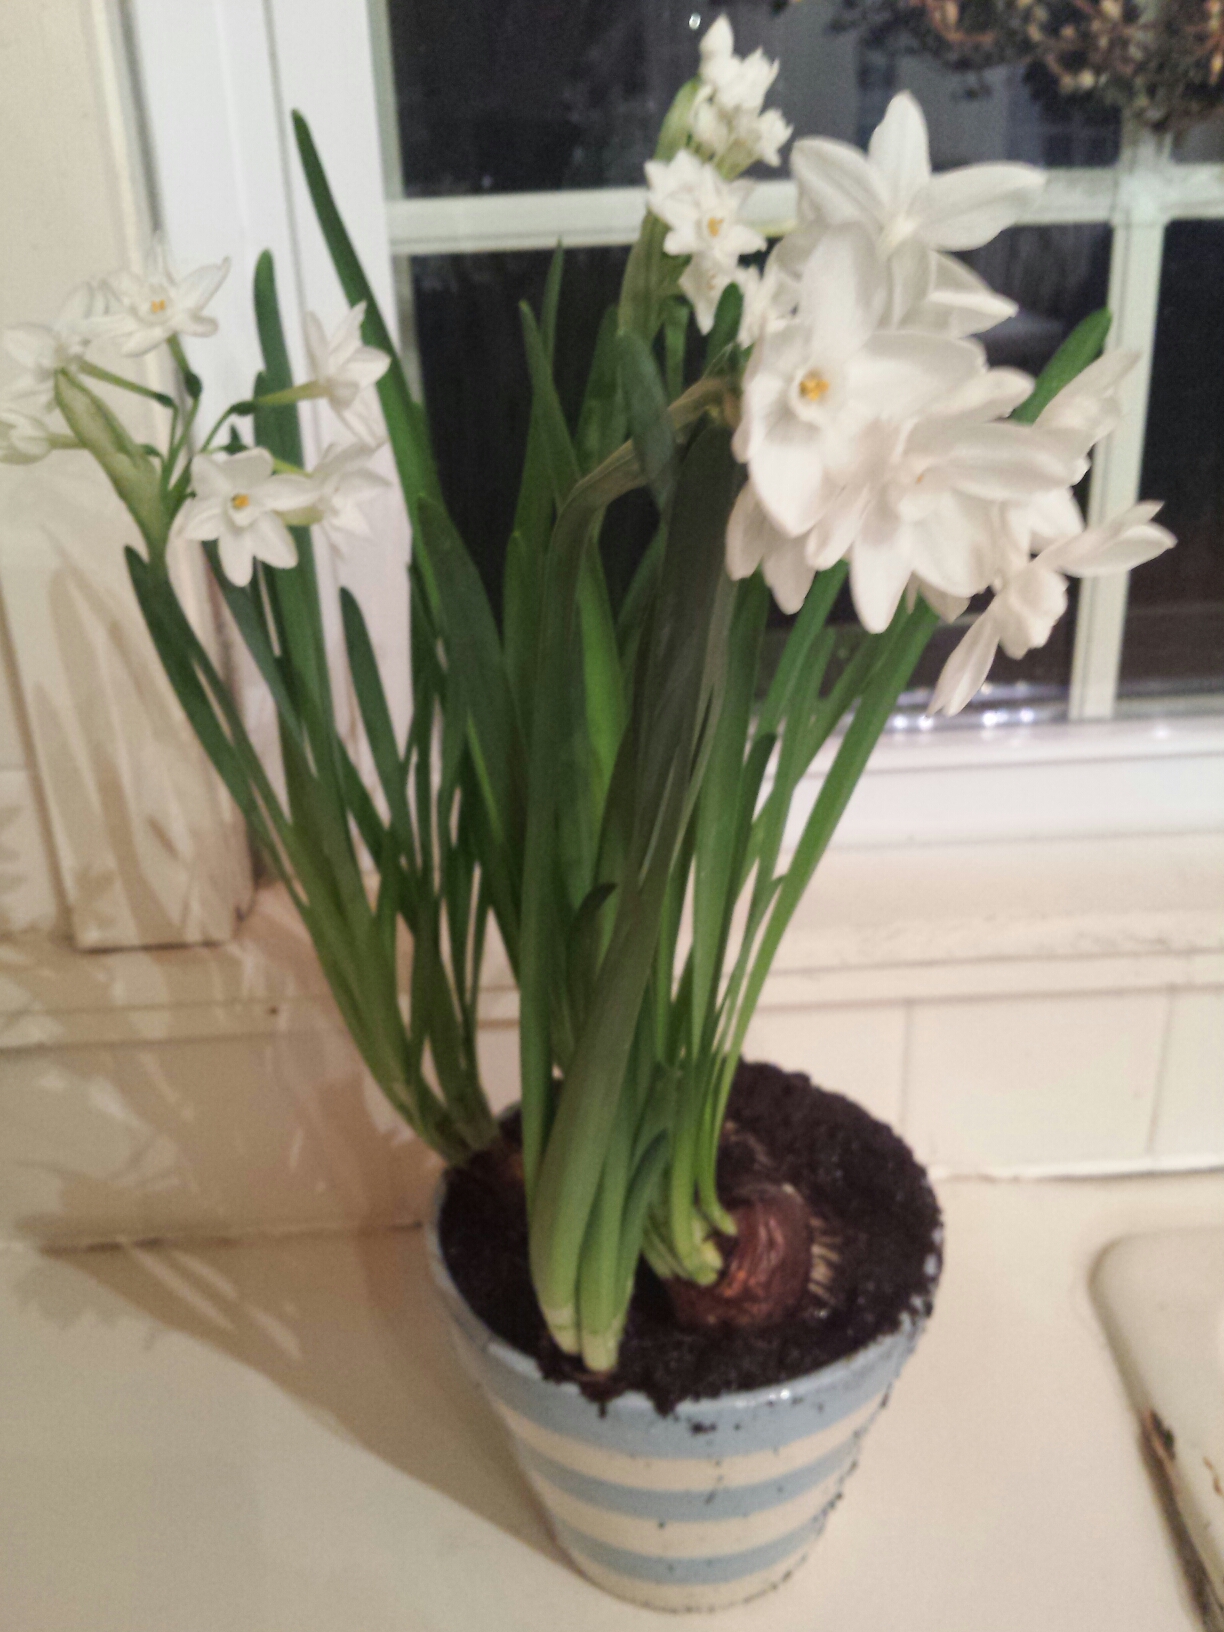 Paper Whites beat the Winter “Blues”